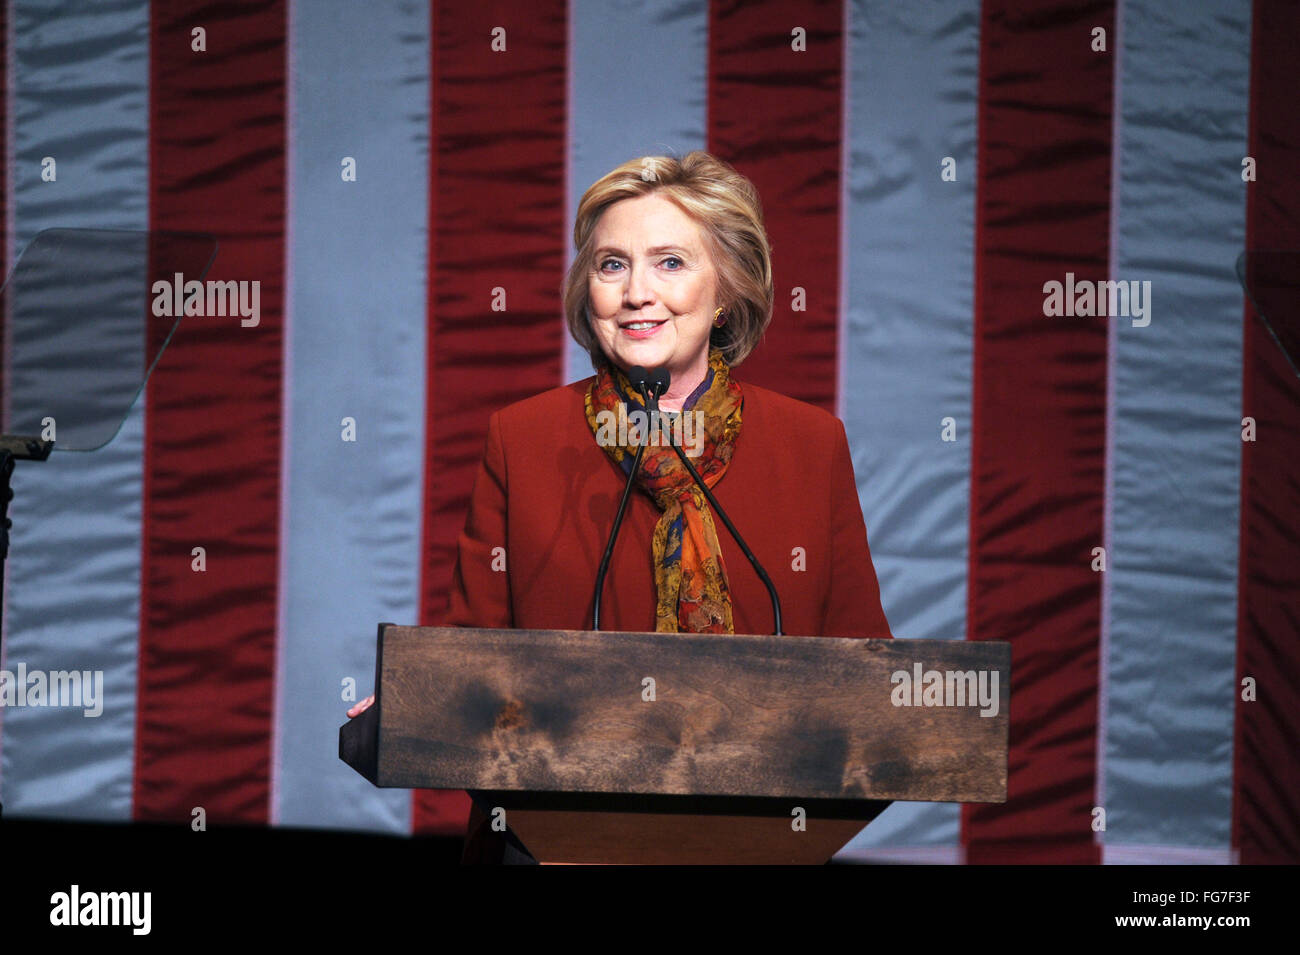 2016 Democratic presidential candidate Hillary Clinton speaks in New York on 'breaking down barriers for African Americans', and her agenda to combat 'systemic racism' and build 'ladders of economic opportunity for African American families. Topics expected to include mass incarceration, poverty, unemployment and voting rights at Schomburg Center for Research in Black Culture in New York on February 16, 2016 Stock Photo